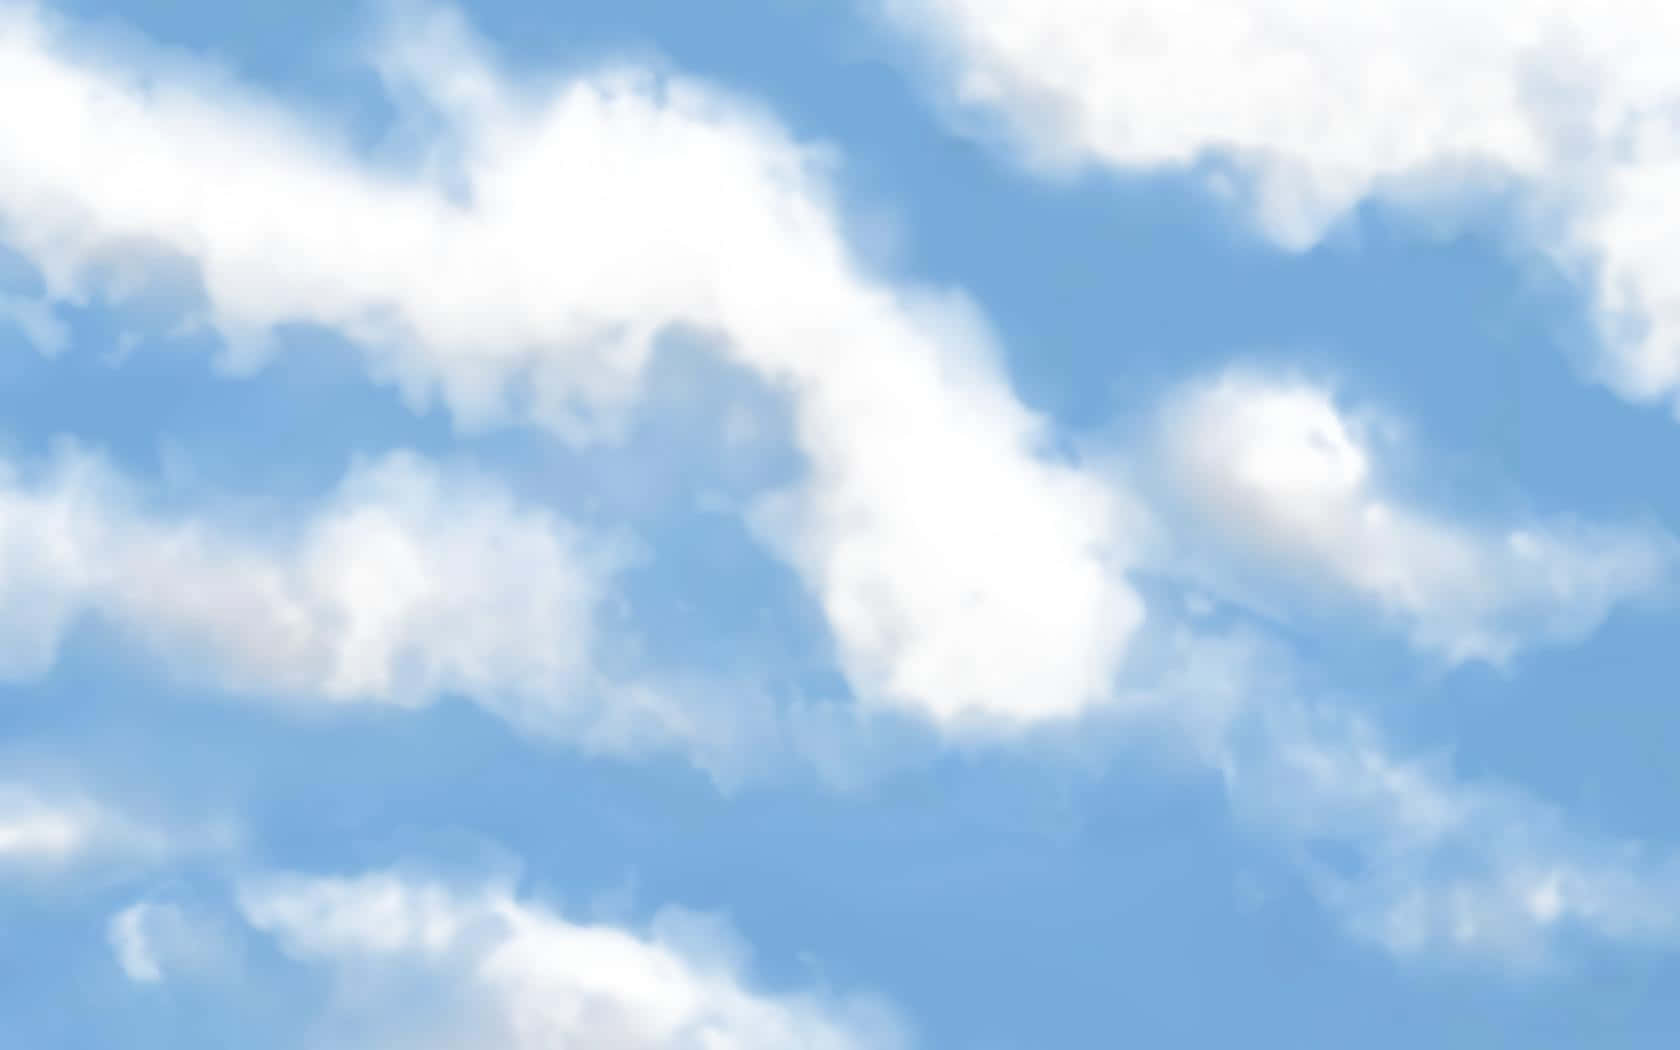 A Painting Of Clouds In The Sky